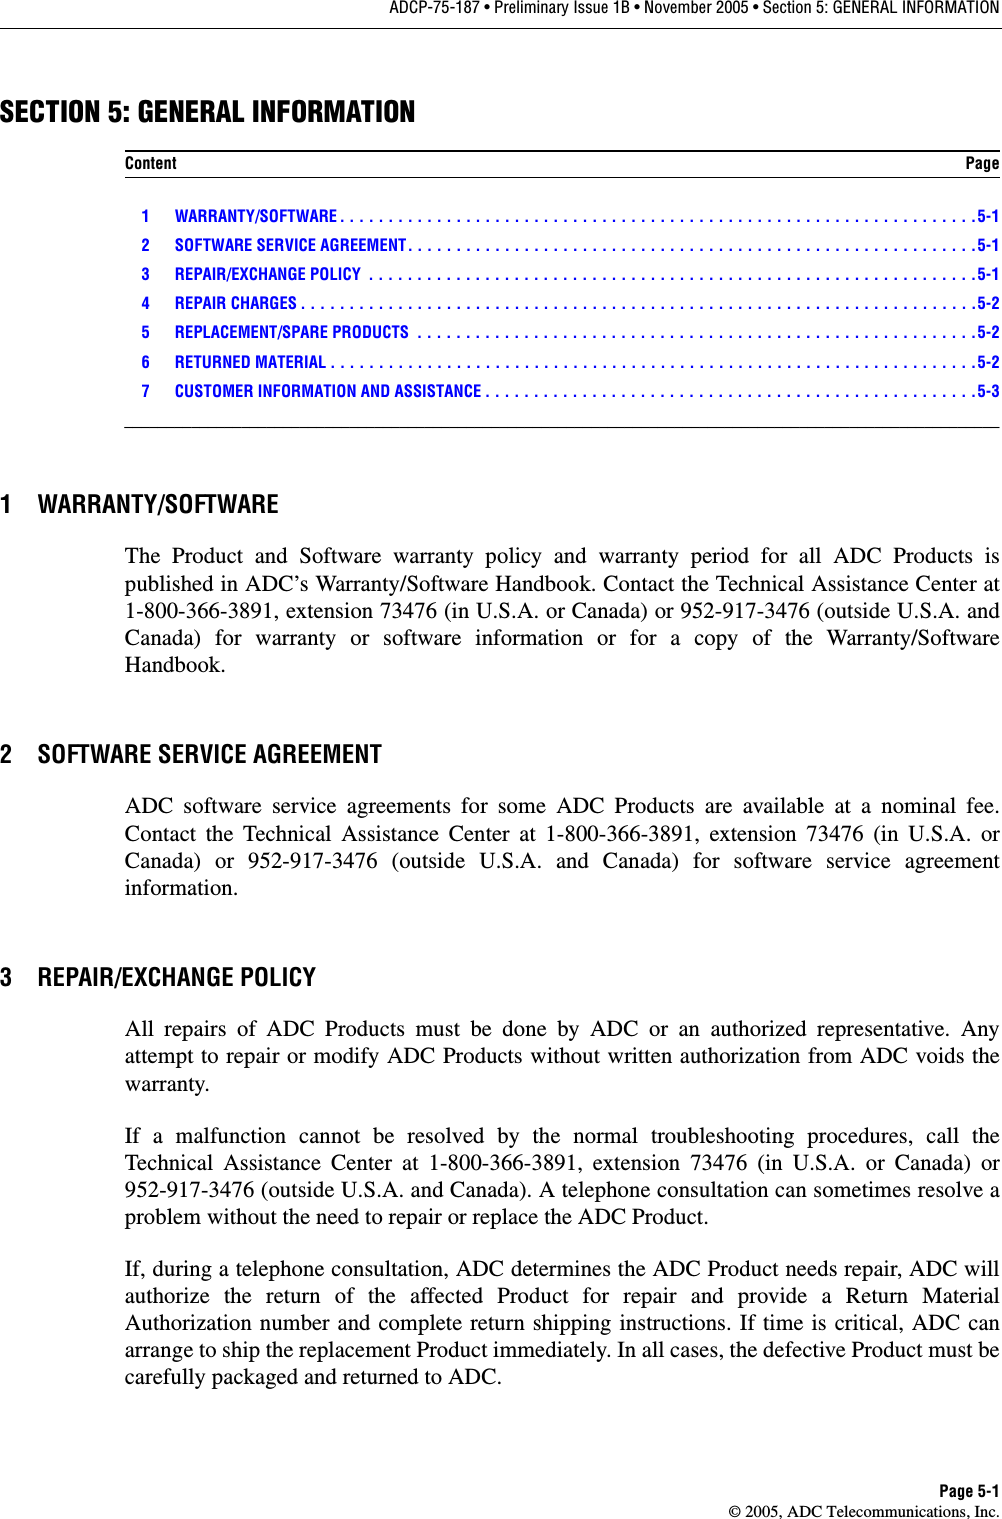 ADCP-75-187 • Preliminary Issue 1B • November 2005 • Section 5: GENERAL INFORMATIONPage 5-1© 2005, ADC Telecommunications, Inc.SECTION 5: GENERAL INFORMATION1 WARRANTY/SOFTWARE . . . . . . . . . . . . . . . . . . . . . . . . . . . . . . . . . . . . . . . . . . . . . . . . . . . . . . . . . . . . . . . . . .5-12 SOFTWARE SERVICE AGREEMENT. . . . . . . . . . . . . . . . . . . . . . . . . . . . . . . . . . . . . . . . . . . . . . . . . . . . . . . . . . .5-13 REPAIR/EXCHANGE POLICY  . . . . . . . . . . . . . . . . . . . . . . . . . . . . . . . . . . . . . . . . . . . . . . . . . . . . . . . . . . . . . . .5-14 REPAIR CHARGES . . . . . . . . . . . . . . . . . . . . . . . . . . . . . . . . . . . . . . . . . . . . . . . . . . . . . . . . . . . . . . . . . . . . . .5-25 REPLACEMENT/SPARE PRODUCTS  . . . . . . . . . . . . . . . . . . . . . . . . . . . . . . . . . . . . . . . . . . . . . . . . . . . . . . . . . .5-26 RETURNED MATERIAL . . . . . . . . . . . . . . . . . . . . . . . . . . . . . . . . . . . . . . . . . . . . . . . . . . . . . . . . . . . . . . . . . . .5-27 CUSTOMER INFORMATION AND ASSISTANCE . . . . . . . . . . . . . . . . . . . . . . . . . . . . . . . . . . . . . . . . . . . . . . . . . . .5-3_________________________________________________________________________________________________________1 WARRANTY/SOFTWAREThe Product and Software warranty policy and warranty period for all ADC Products ispublished in ADC’s Warranty/Software Handbook. Contact the Technical Assistance Center at1-800-366-3891, extension 73476 (in U.S.A. or Canada) or 952-917-3476 (outside U.S.A. andCanada) for warranty or software information or for a copy of the Warranty/SoftwareHandbook.2 SOFTWARE SERVICE AGREEMENTADC software service agreements for some ADC Products are available at a nominal fee.Contact the Technical Assistance Center at 1-800-366-3891, extension 73476 (in U.S.A. orCanada) or 952-917-3476 (outside U.S.A. and Canada) for software service agreementinformation.3 REPAIR/EXCHANGE POLICYAll repairs of ADC Products must be done by ADC or an authorized representative. Anyattempt to repair or modify ADC Products without written authorization from ADC voids thewarranty.If a malfunction cannot be resolved by the normal troubleshooting procedures, call theTechnical Assistance Center at 1-800-366-3891, extension 73476 (in U.S.A. or Canada) or952-917-3476 (outside U.S.A. and Canada). A telephone consultation can sometimes resolve aproblem without the need to repair or replace the ADC Product.If, during a telephone consultation, ADC determines the ADC Product needs repair, ADC willauthorize the return of the affected Product for repair and provide a Return MaterialAuthorization number and complete return shipping instructions. If time is critical, ADC canarrange to ship the replacement Product immediately. In all cases, the defective Product must becarefully packaged and returned to ADC.Content Page